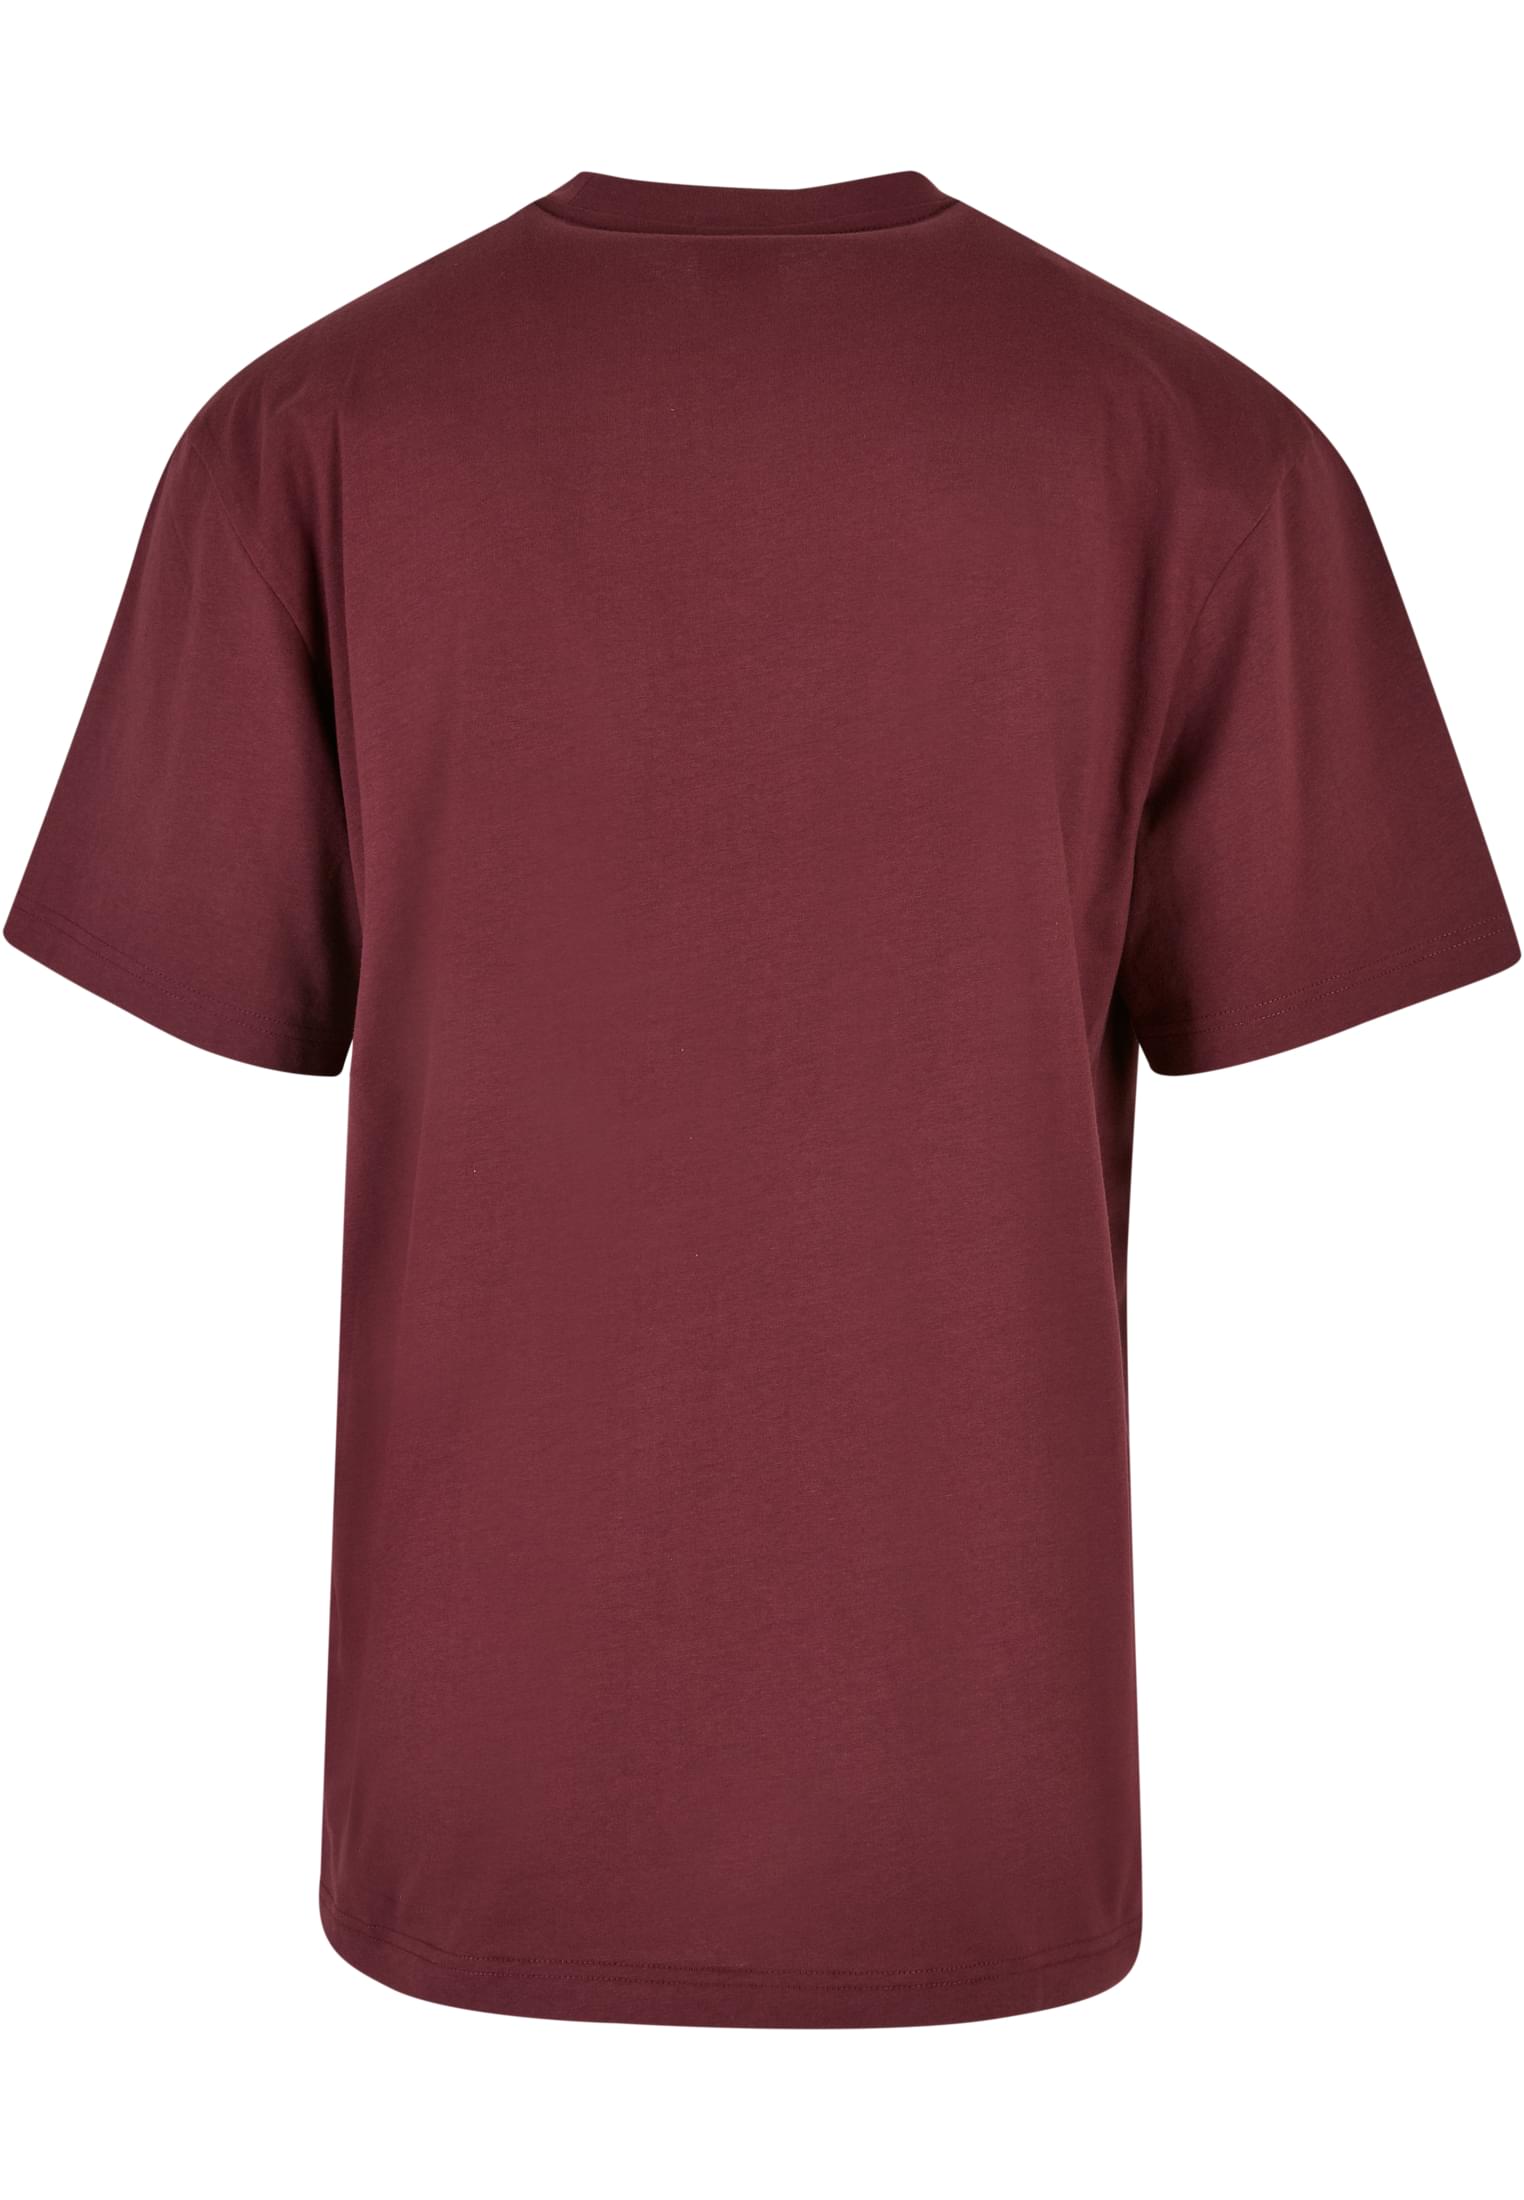 Plus Size Tall Tee in Farbe cherry